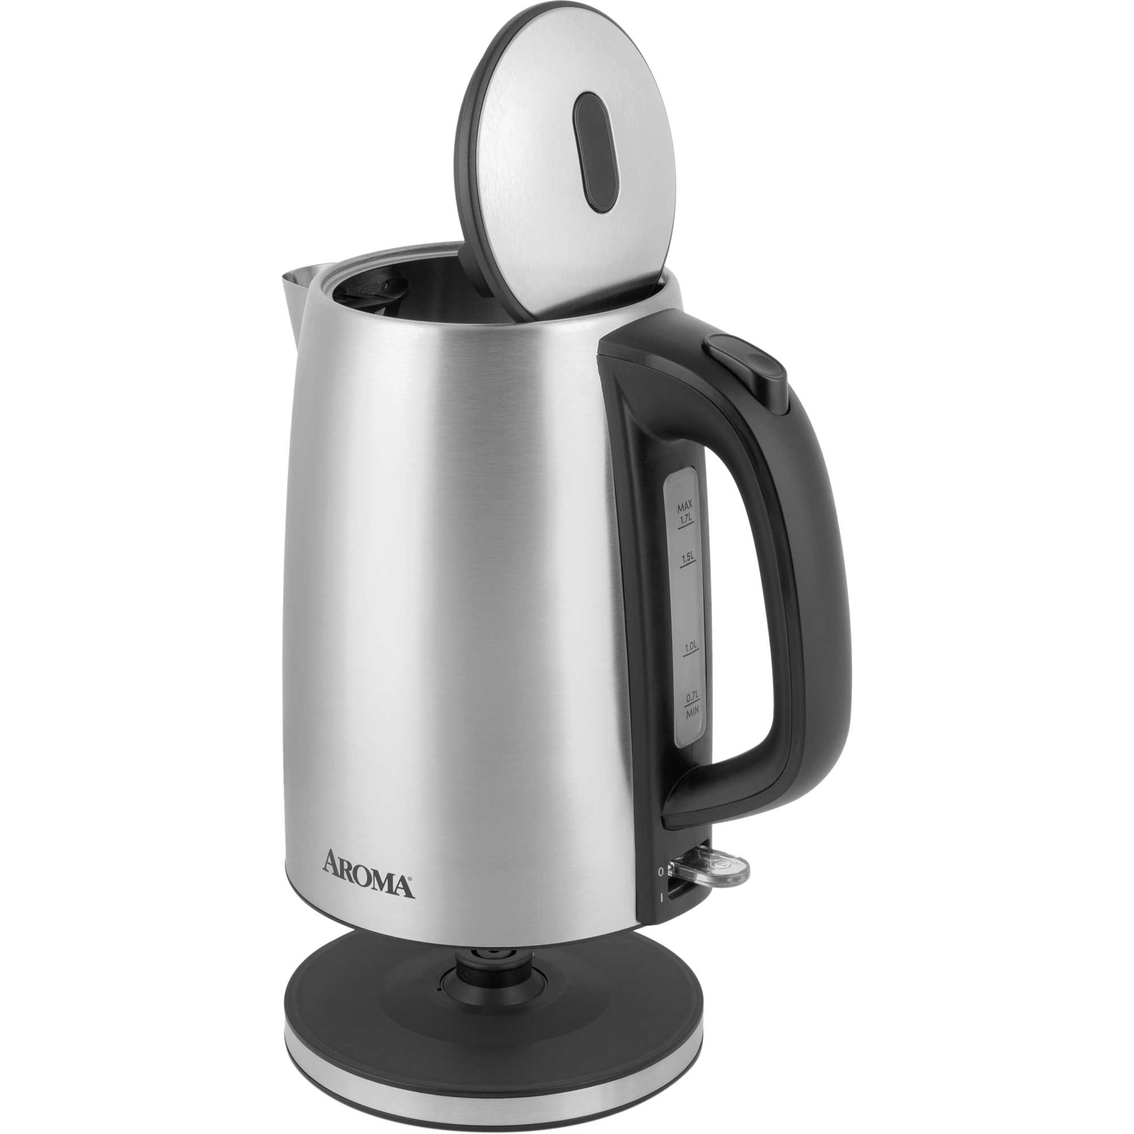 Aroma 7 Cup Stainless Steel Electric Kettle - Image 2 of 2